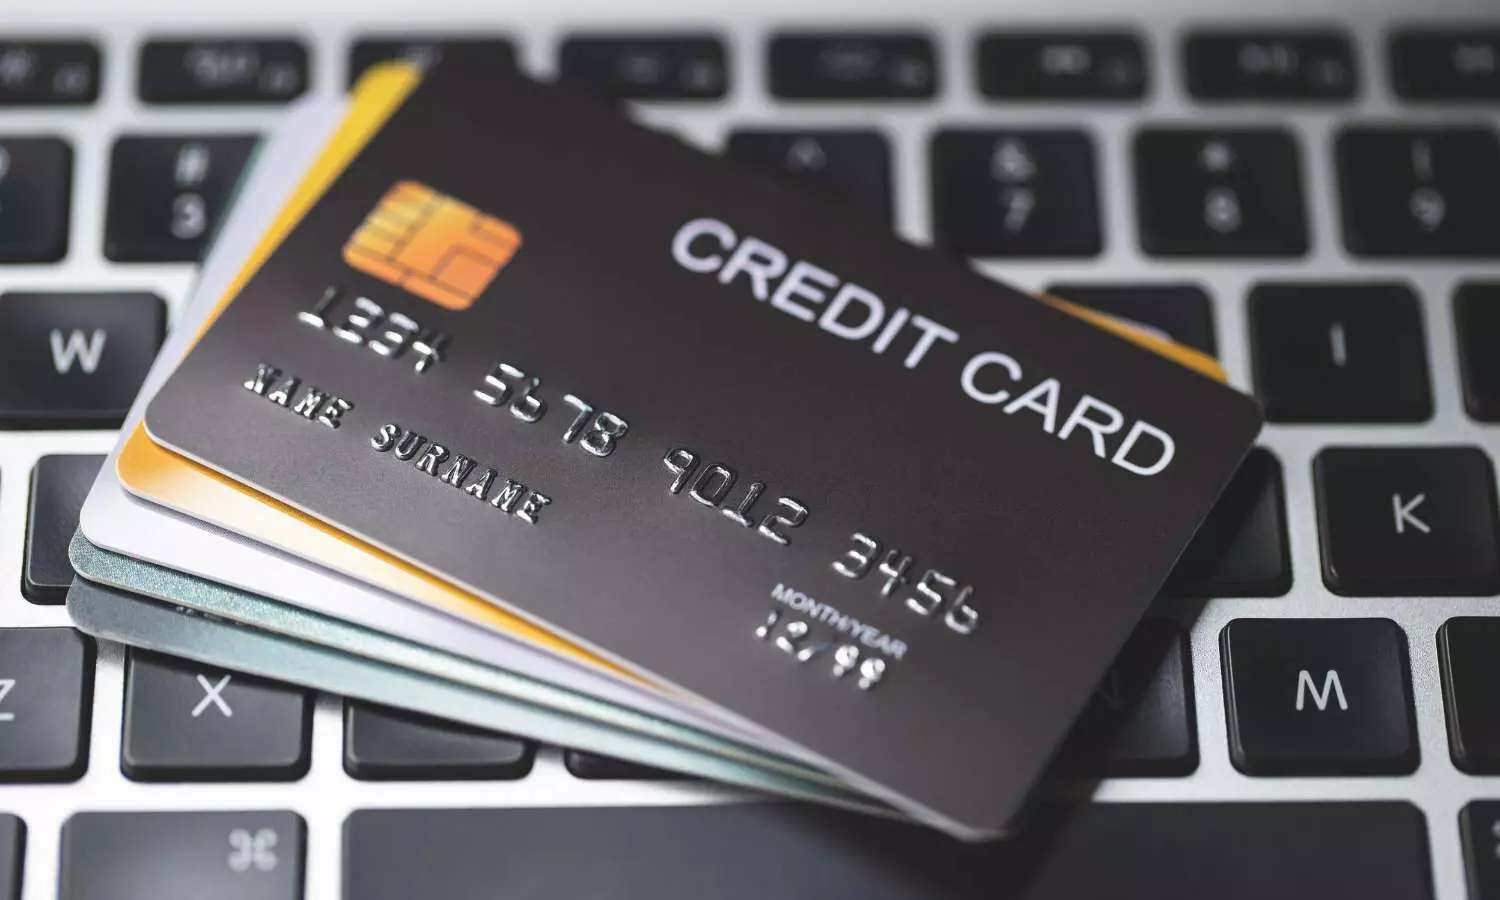 Indias Credit Card market faces a remarkable 27% increase in transactions